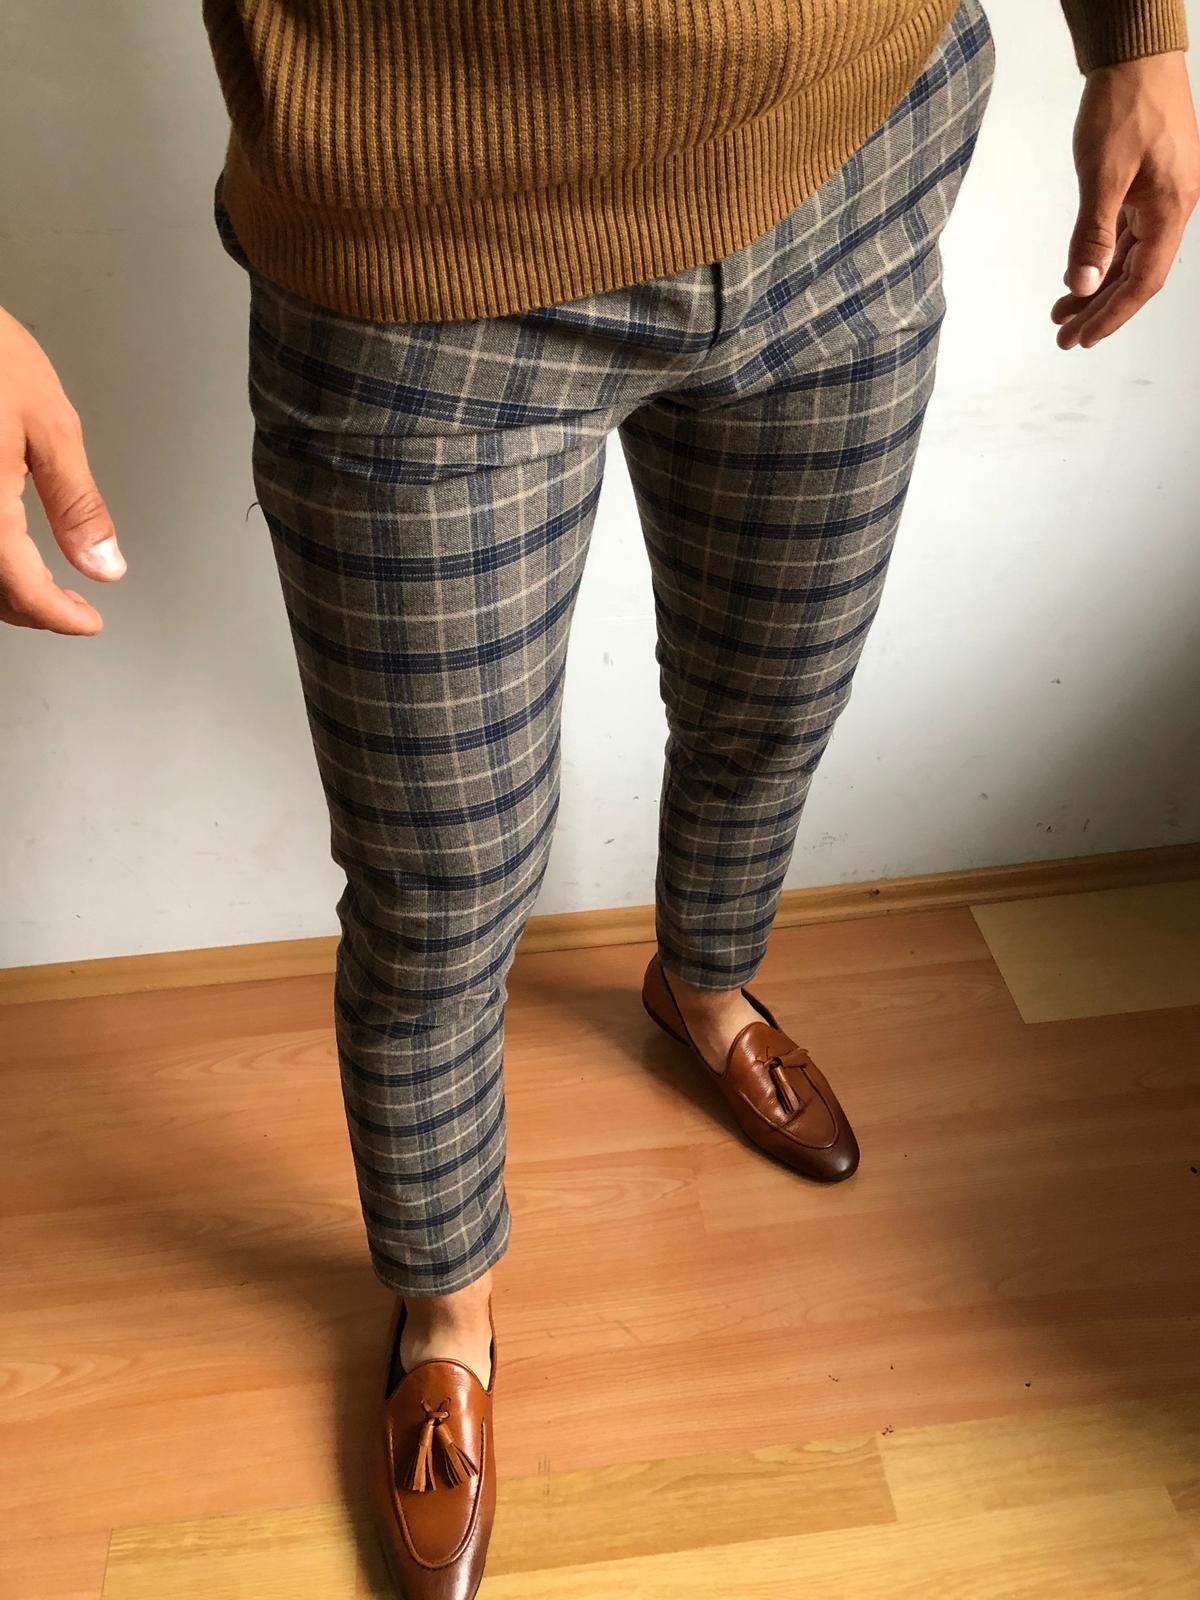 Buy Camel Slim Fit Plaid Pants by Gentwith.com with Free Shipping